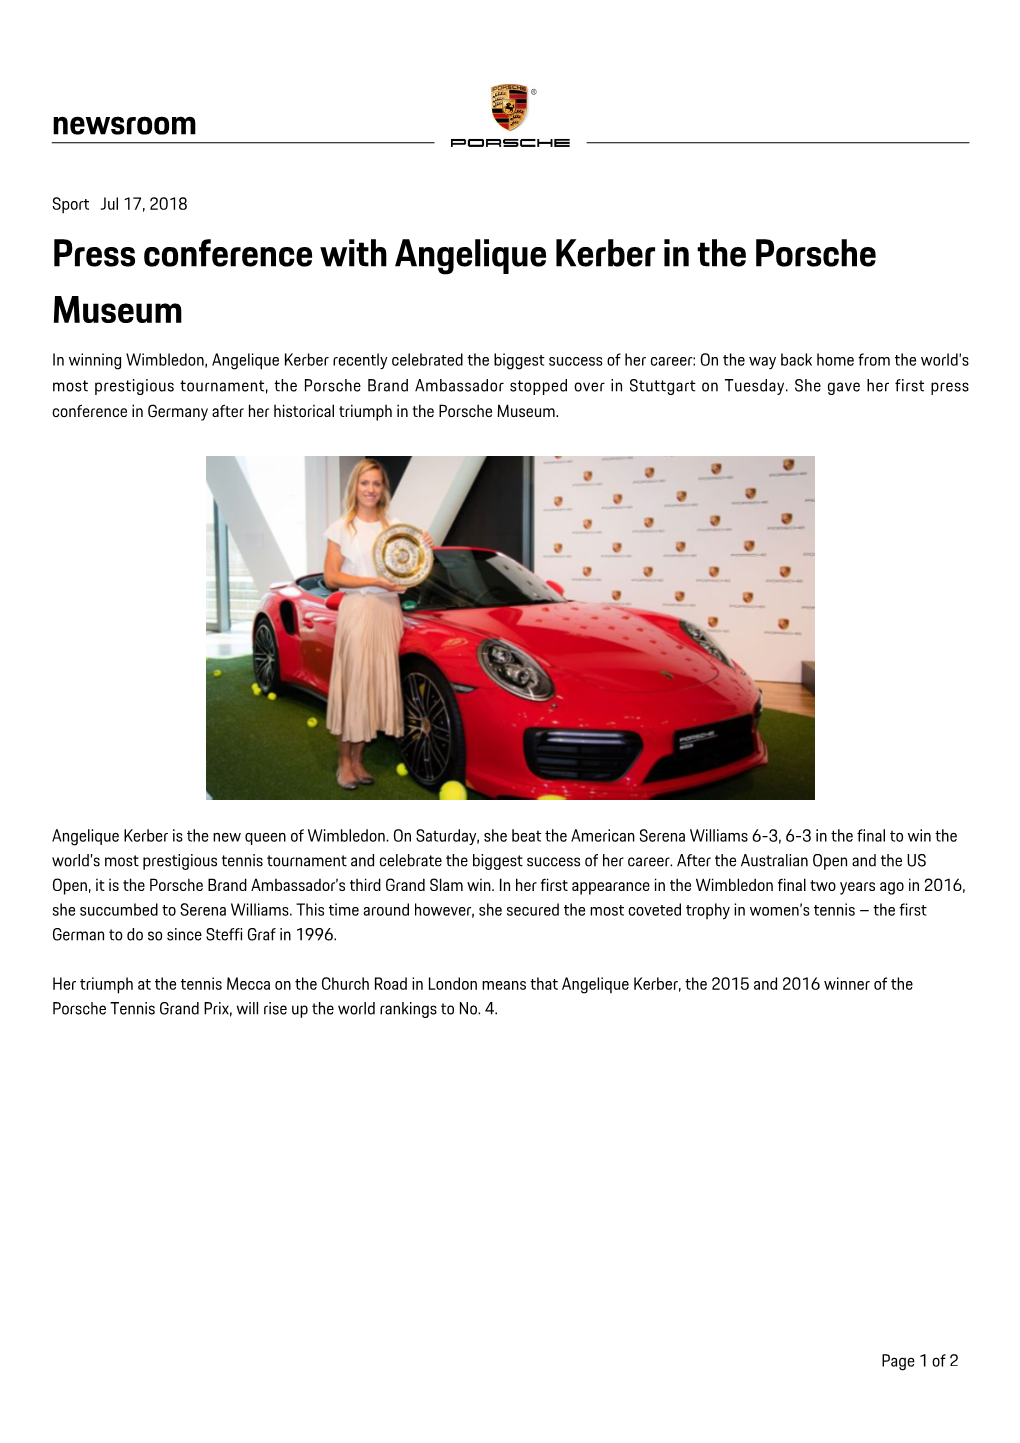 Press Conference with Angelique Kerber in the Porsche Museum